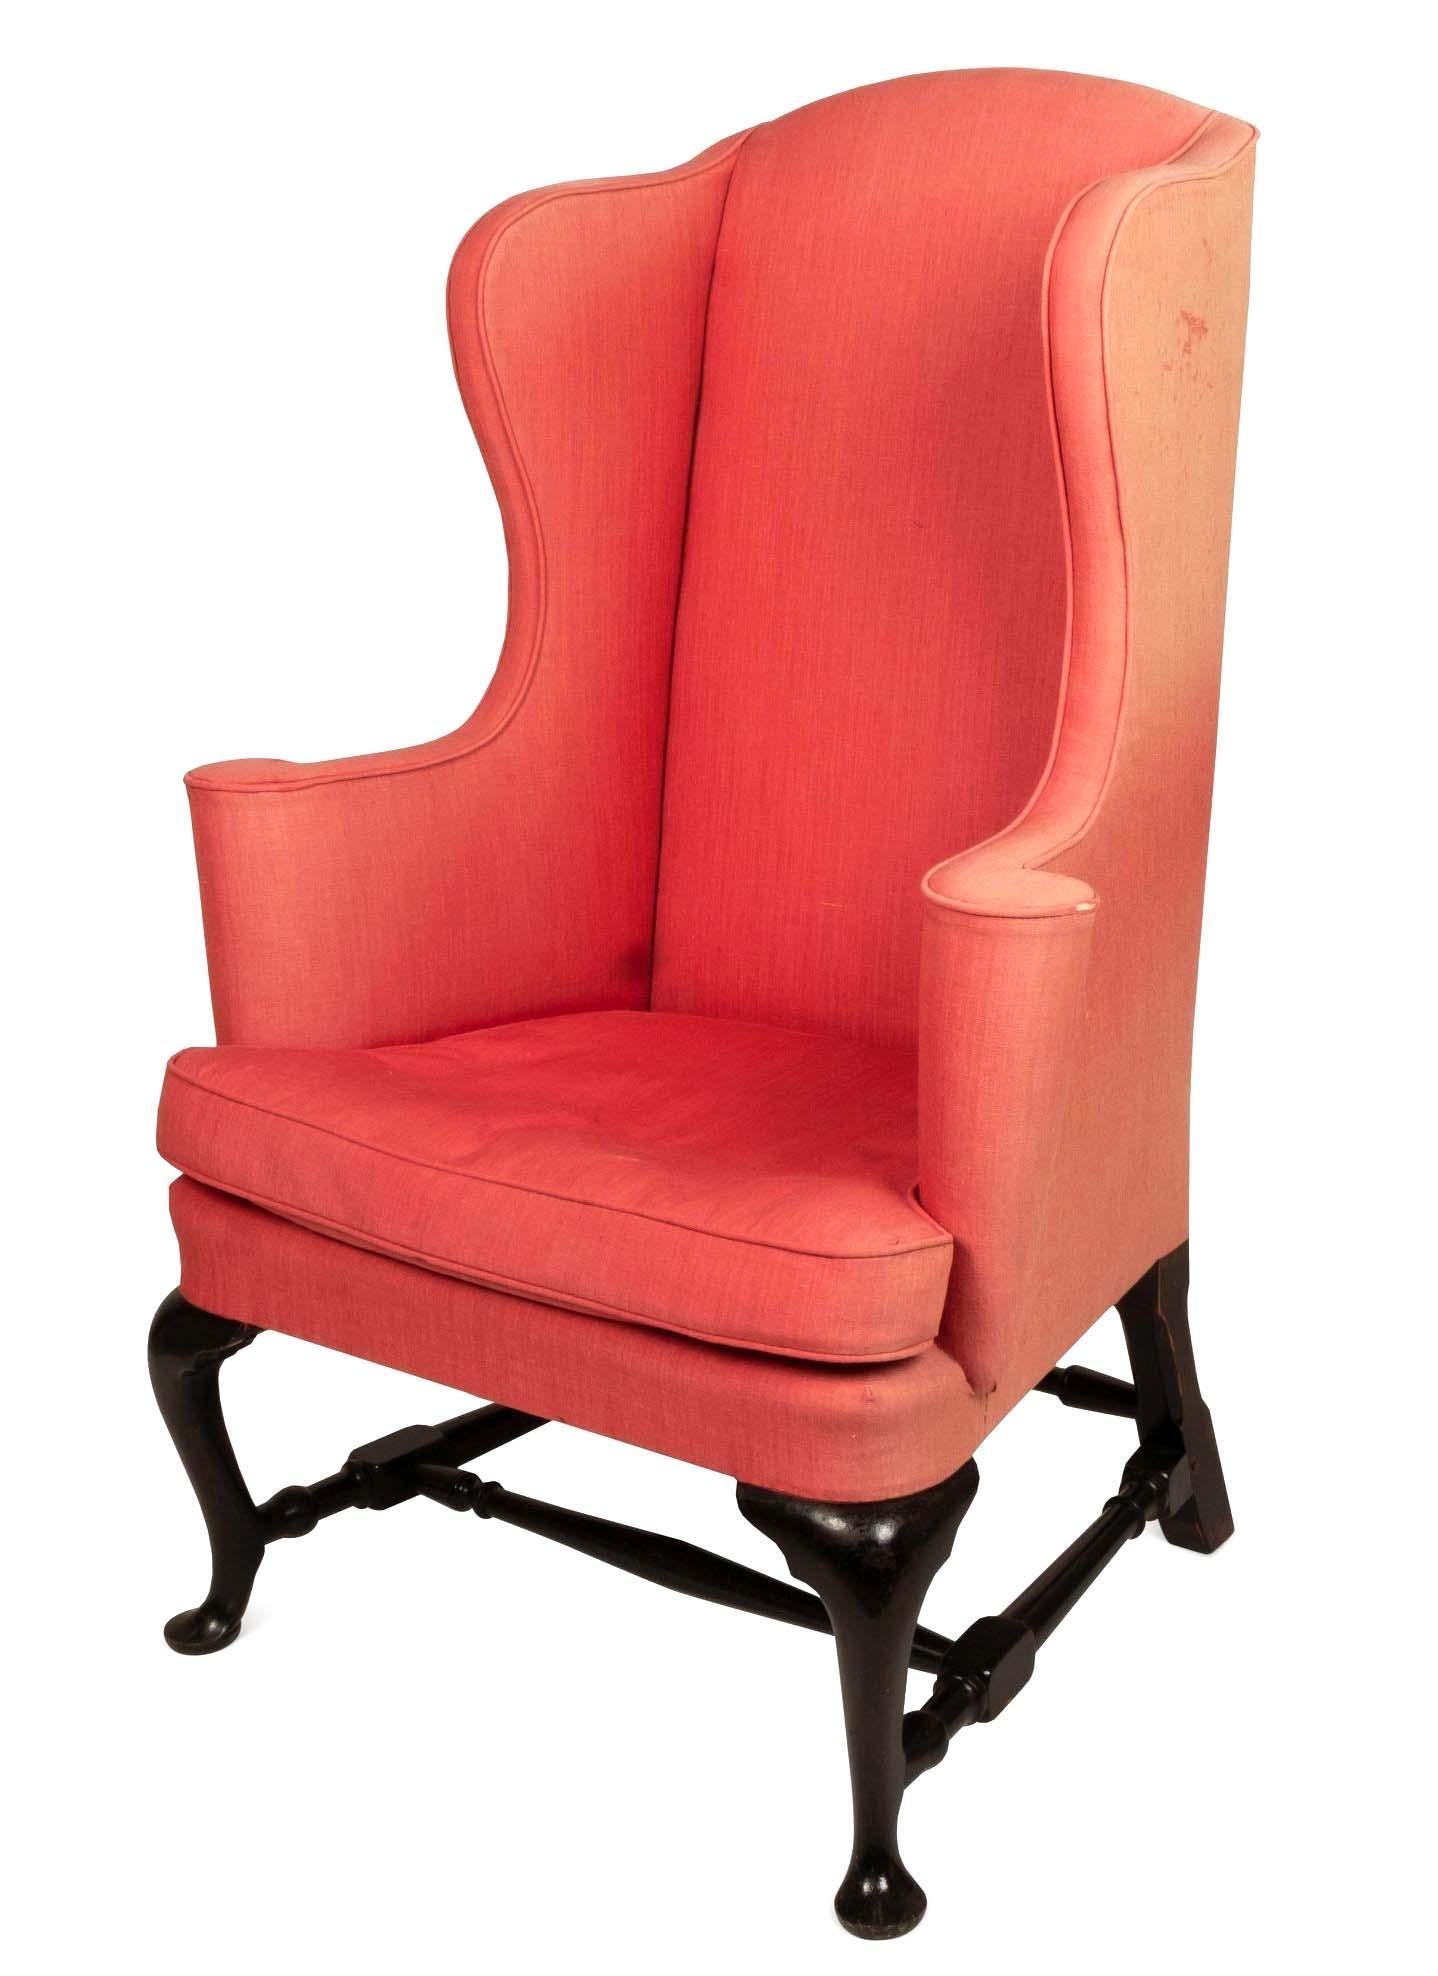 Hand-Crafted Antique Queen Anne Style Red Wingback Armchair For Sale